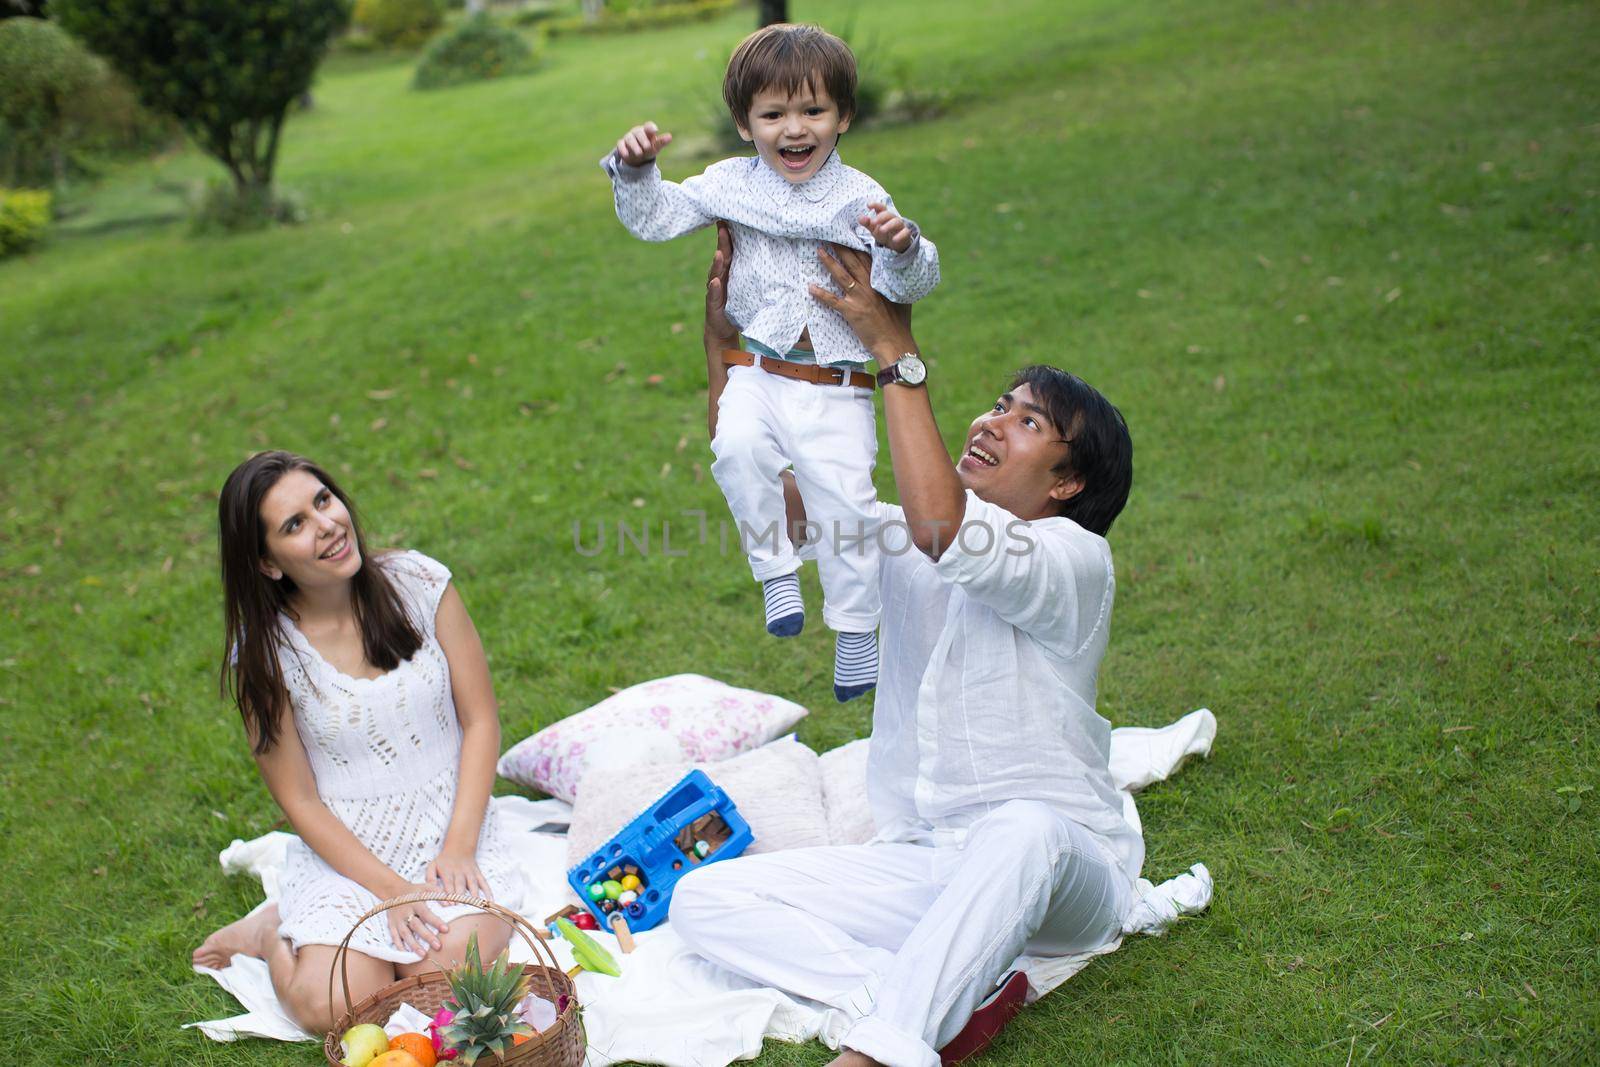 Family picnic of a happy family in the park on a green lawn by StudioPeace